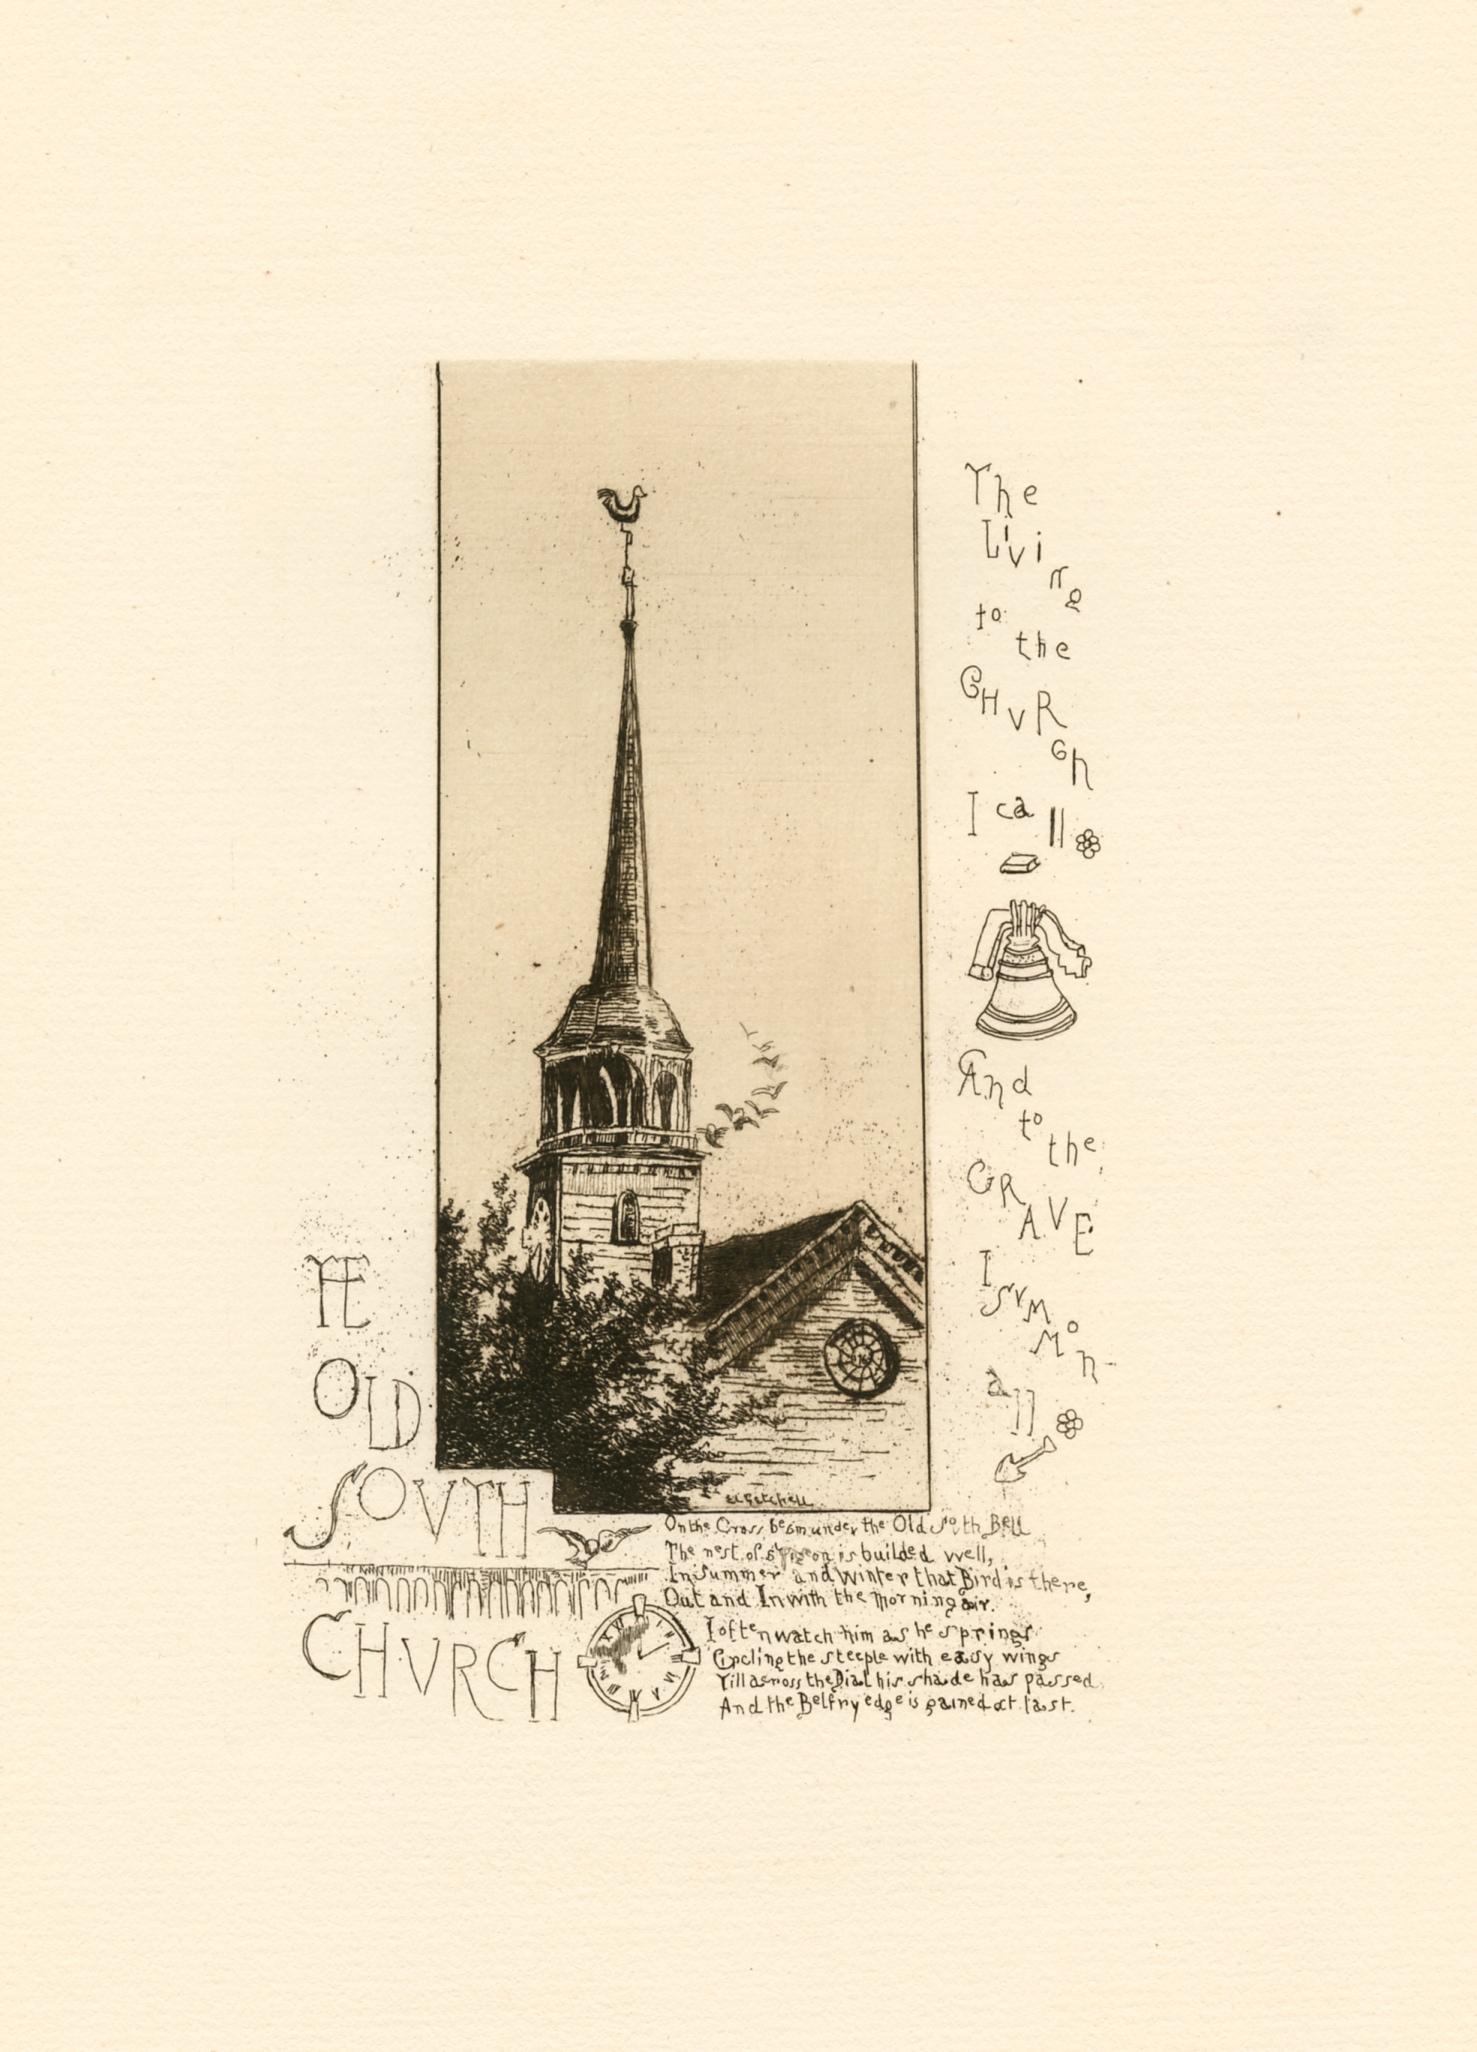 "Old South Church" original etching - Print by Edith Loring Getchell